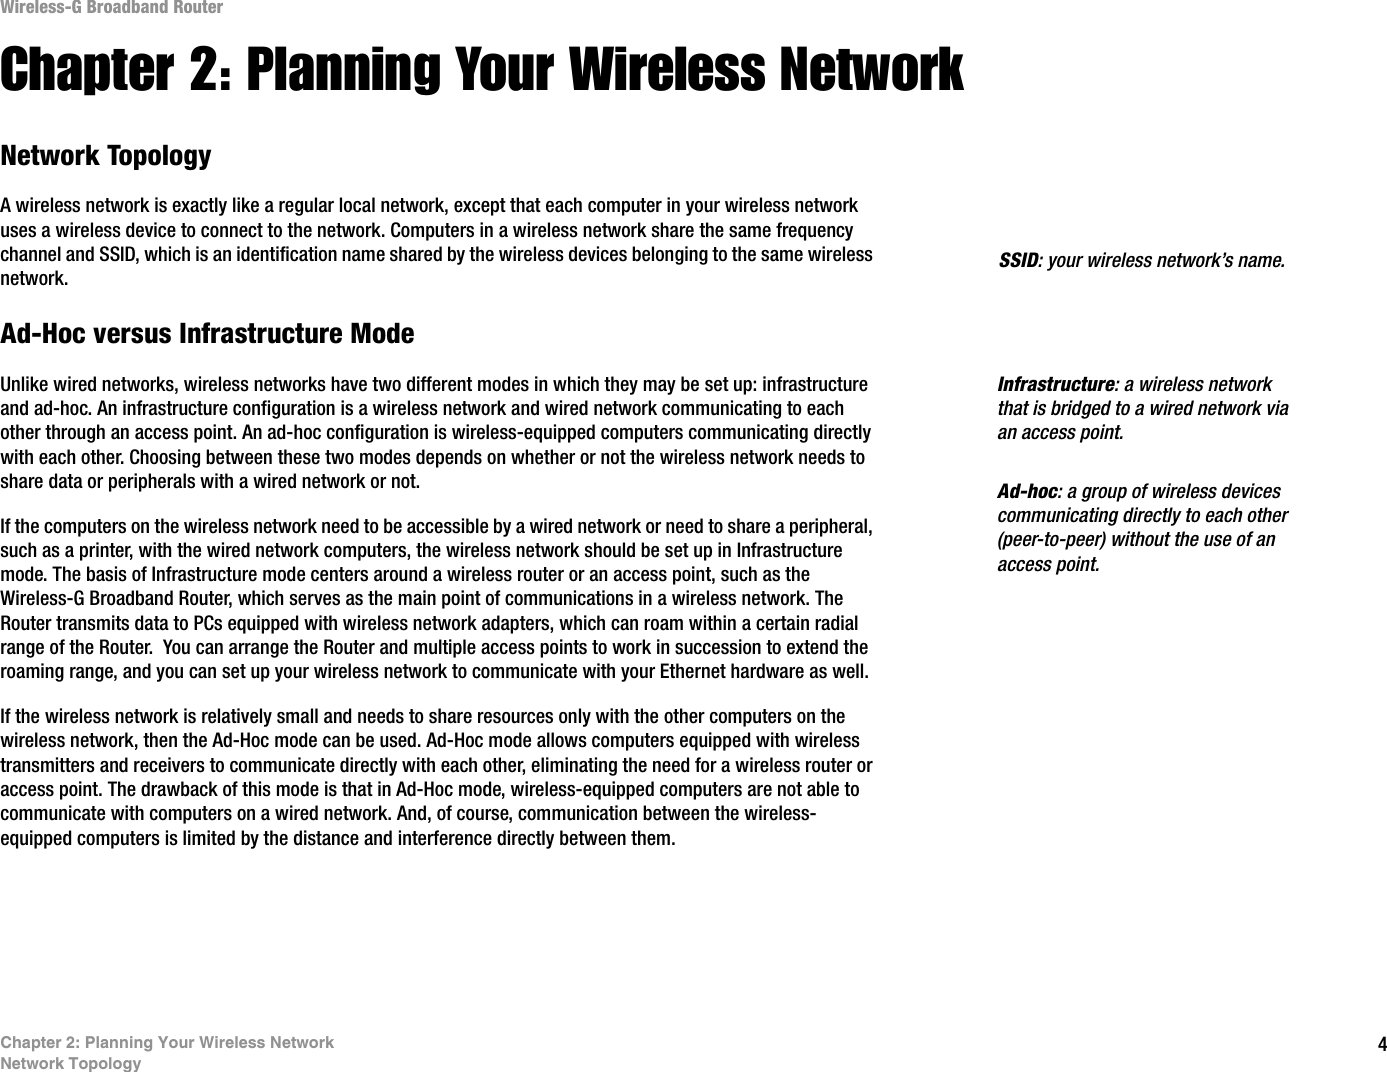 4Chapter 2: Planning Your Wireless NetworkNetwork TopologyWireless-G Broadband RouterChapter 2: Planning Your Wireless NetworkNetwork TopologyA wireless network is exactly like a regular local network, except that each computer in your wireless network uses a wireless device to connect to the network. Computers in a wireless network share the same frequency channel and SSID, which is an identification name shared by the wireless devices belonging to the same wireless network.Ad-Hoc versus Infrastructure ModeUnlike wired networks, wireless networks have two different modes in which they may be set up: infrastructure and ad-hoc. An infrastructure configuration is a wireless network and wired network communicating to each other through an access point. An ad-hoc configuration is wireless-equipped computers communicating directly with each other. Choosing between these two modes depends on whether or not the wireless network needs to share data or peripherals with a wired network or not. If the computers on the wireless network need to be accessible by a wired network or need to share a peripheral, such as a printer, with the wired network computers, the wireless network should be set up in Infrastructure mode. The basis of Infrastructure mode centers around a wireless router or an access point, such as the Wireless-G Broadband Router, which serves as the main point of communications in a wireless network. The Router transmits data to PCs equipped with wireless network adapters, which can roam within a certain radial range of the Router.  You can arrange the Router and multiple access points to work in succession to extend the roaming range, and you can set up your wireless network to communicate with your Ethernet hardware as well. If the wireless network is relatively small and needs to share resources only with the other computers on the wireless network, then the Ad-Hoc mode can be used. Ad-Hoc mode allows computers equipped with wireless transmitters and receivers to communicate directly with each other, eliminating the need for a wireless router or access point. The drawback of this mode is that in Ad-Hoc mode, wireless-equipped computers are not able to communicate with computers on a wired network. And, of course, communication between the wireless-equipped computers is limited by the distance and interference directly between them. Infrastructure: a wireless network that is bridged to a wired network via an access point.SSID: your wireless network’s name.Ad-hoc: a group of wireless devices communicating directly to each other (peer-to-peer) without the use of an access point.